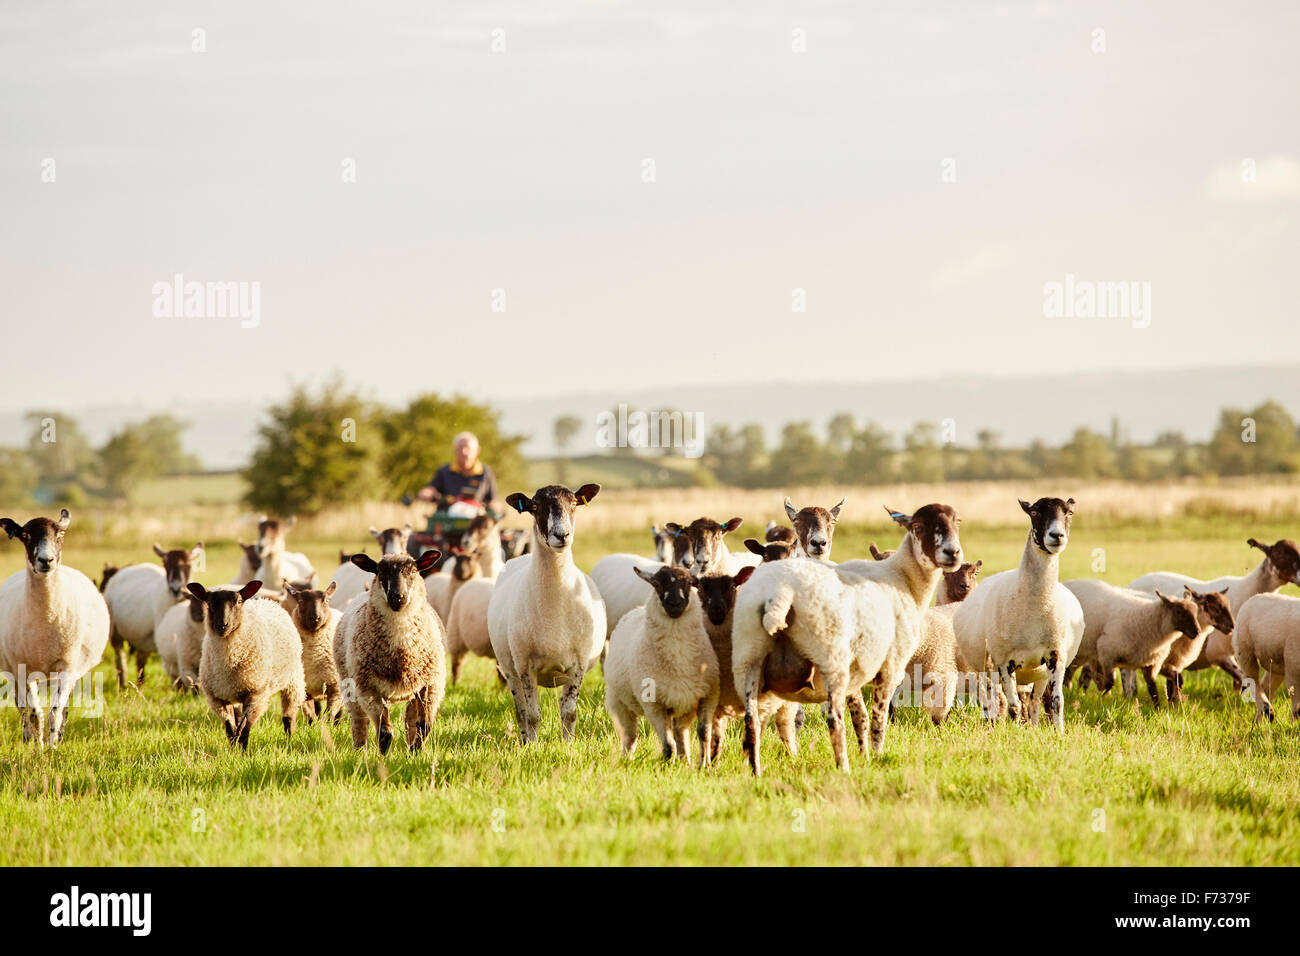 A flock of sheep alert with their heads up, and a man on a quadbike. Stock Photo